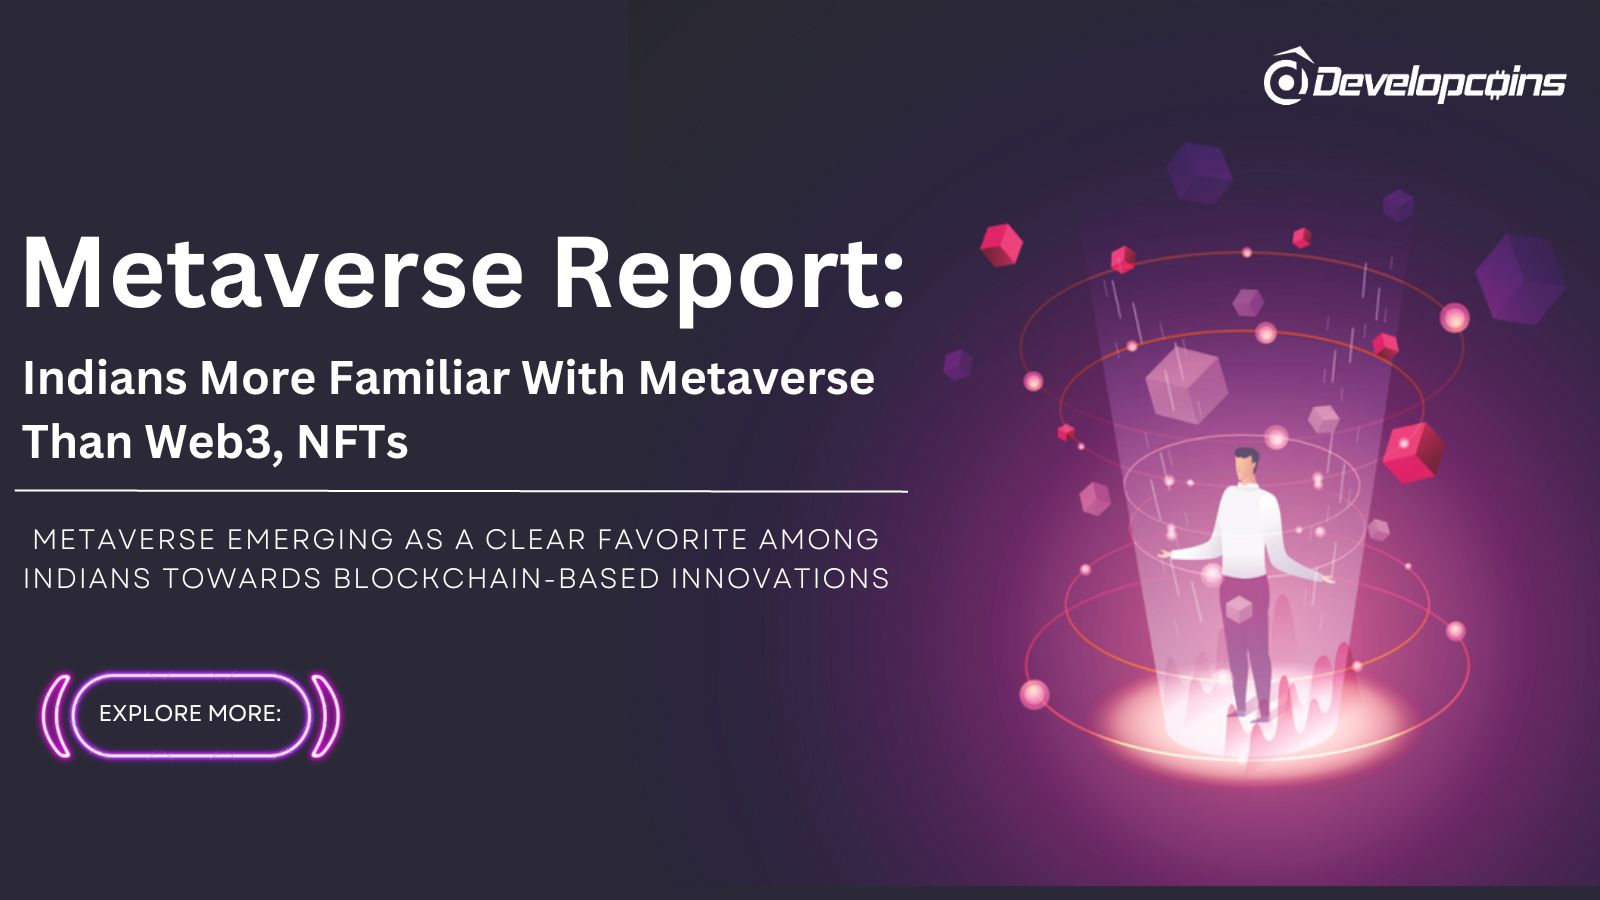 Report Reveals Indians' Stronger Familiarity with Metaverse Over Web3 and NFTs